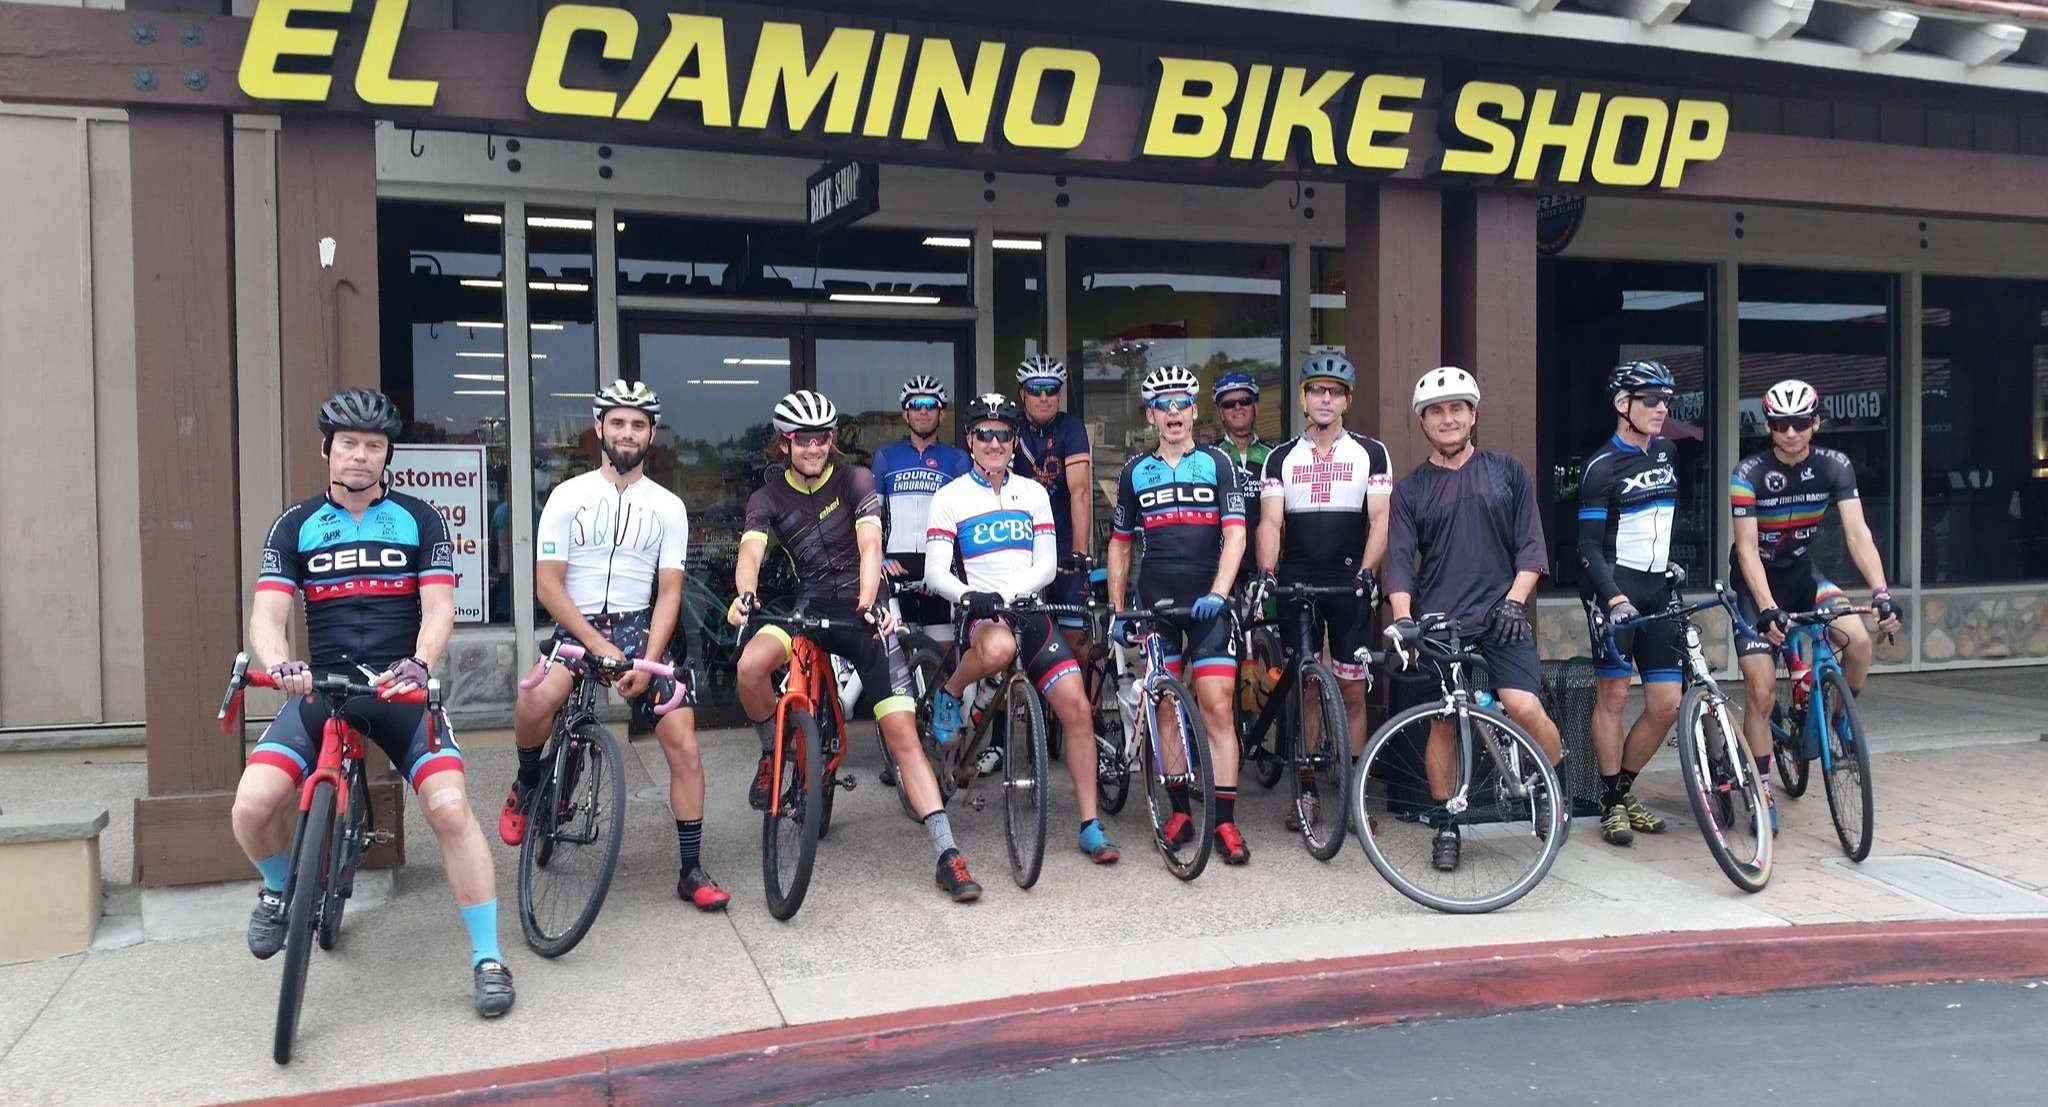 Group of cyclists in front of El Camino Bike Shop